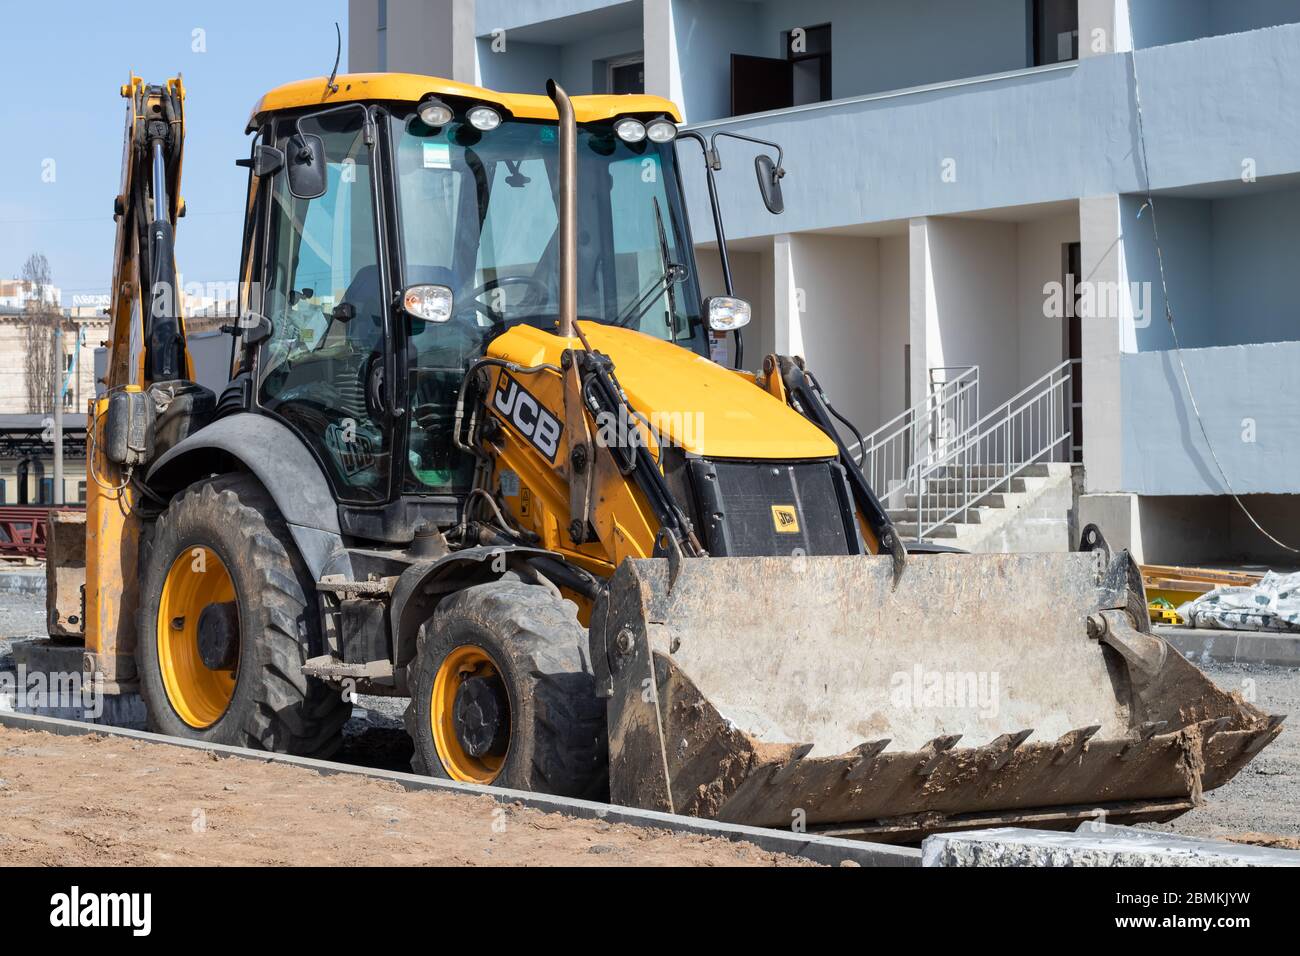 Kharkiv, Ukraine, March 29, 2020: Excavator JCB parked outside. The dirty yellow tractor at the construction site. European vehicle, bulldozer with bu Stock Photo